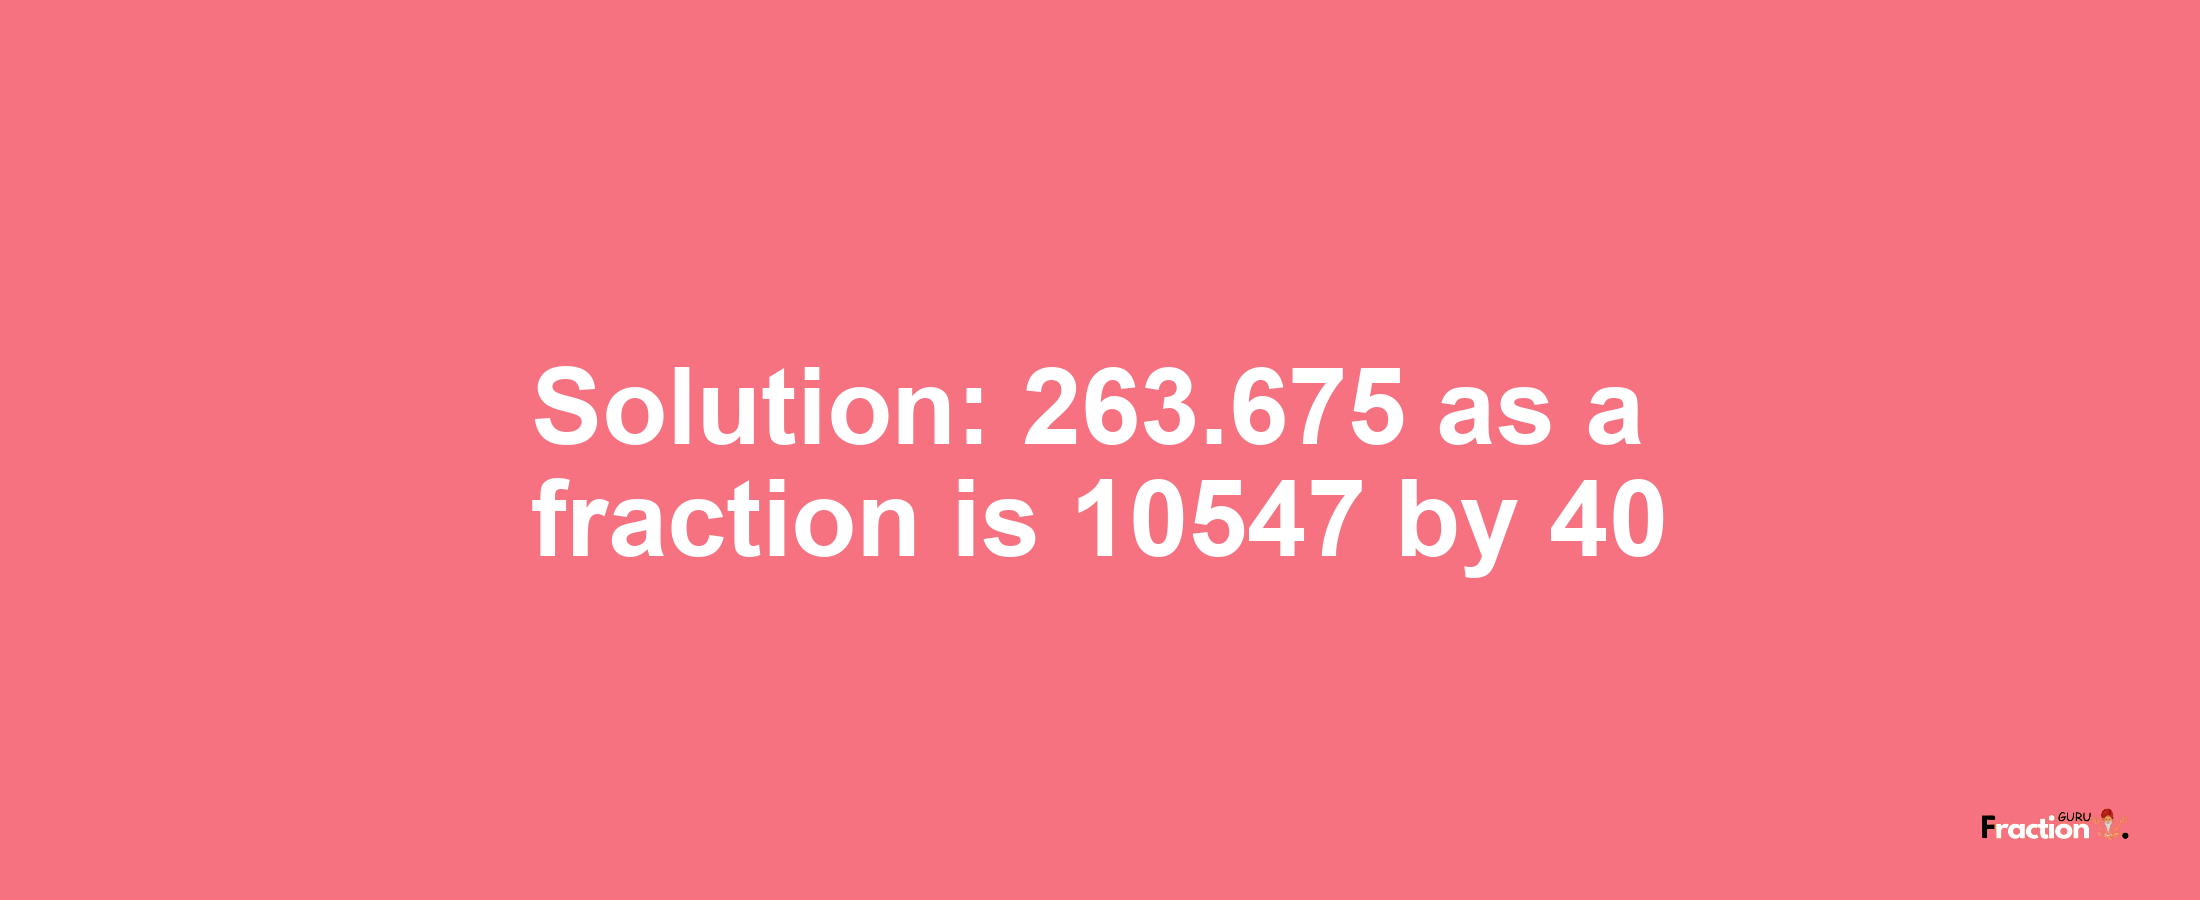 Solution:263.675 as a fraction is 10547/40